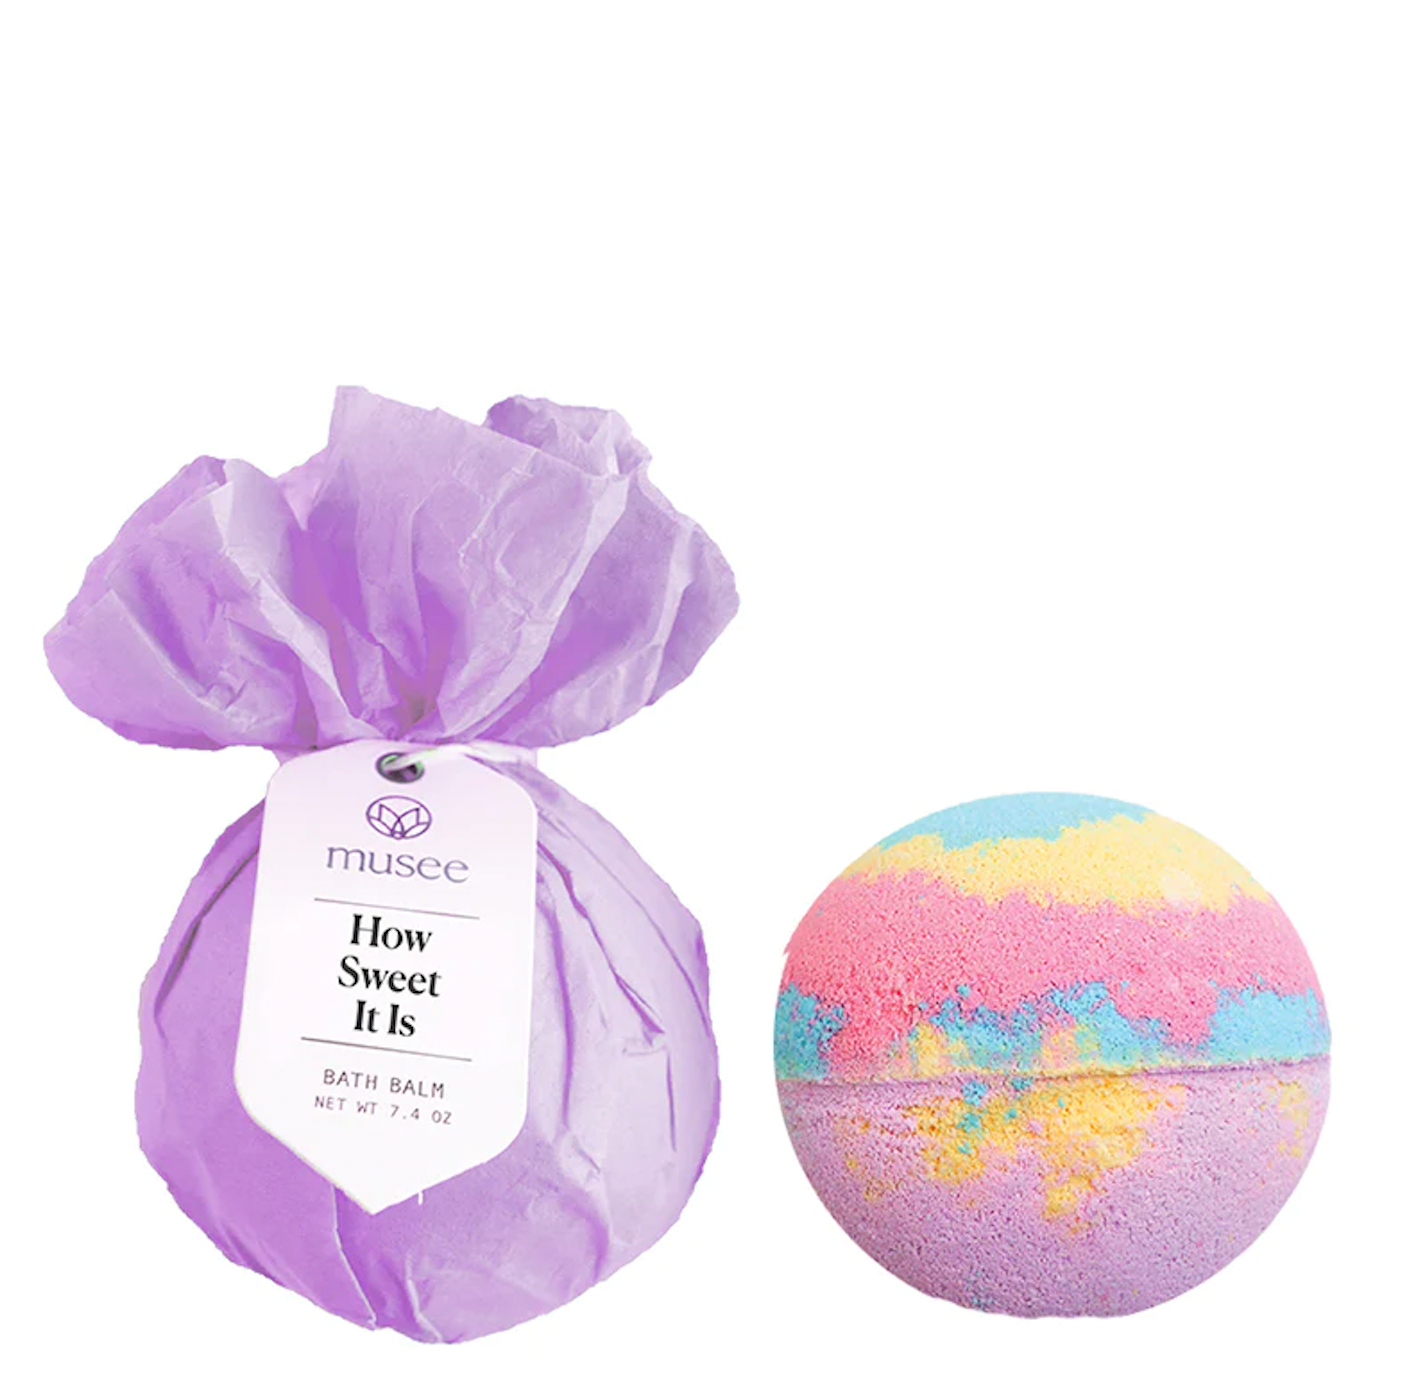 Musee Bath Balm -How Sweet It Is